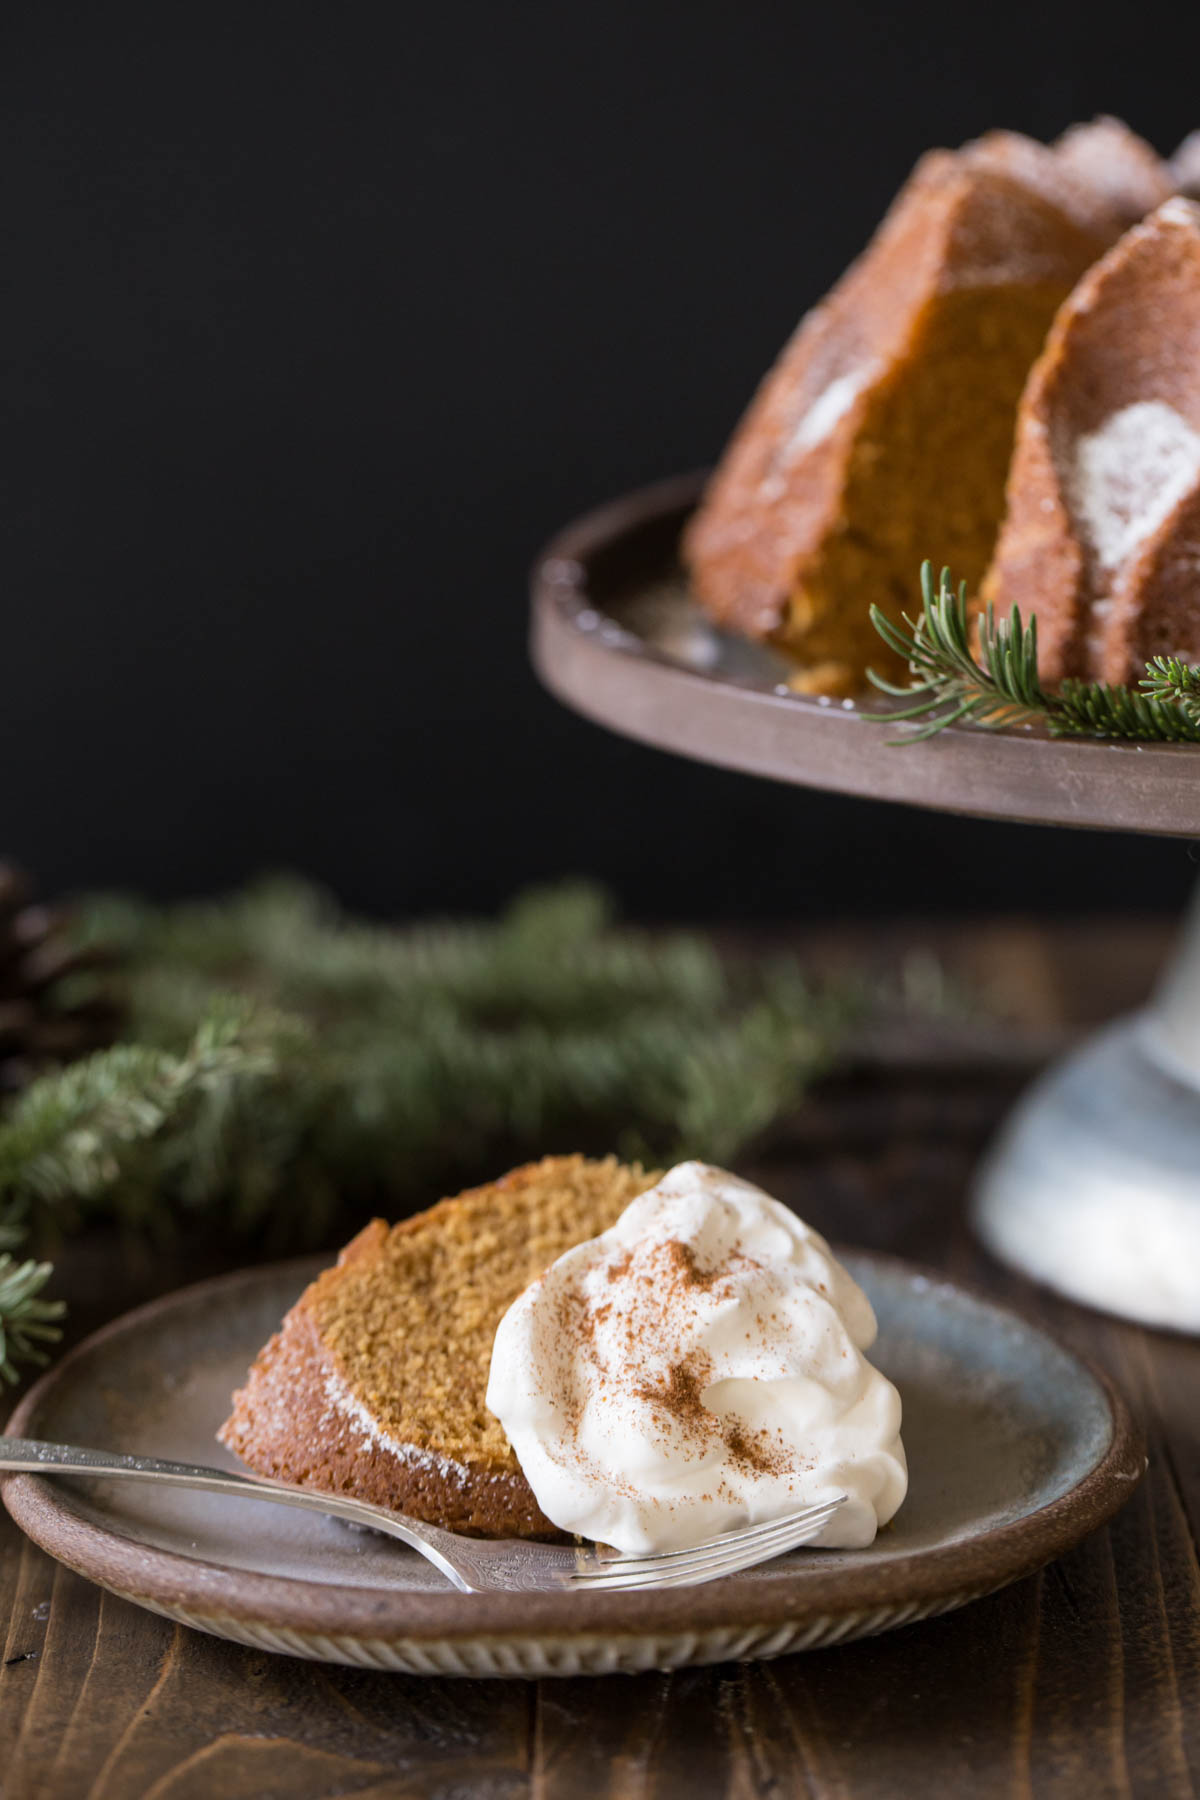 A slice of Gingerbread Bundt Cake on a plate, topped with whipped cream, sitting next to the rest of the Gingerbread Bundt Cake on a cake stand.